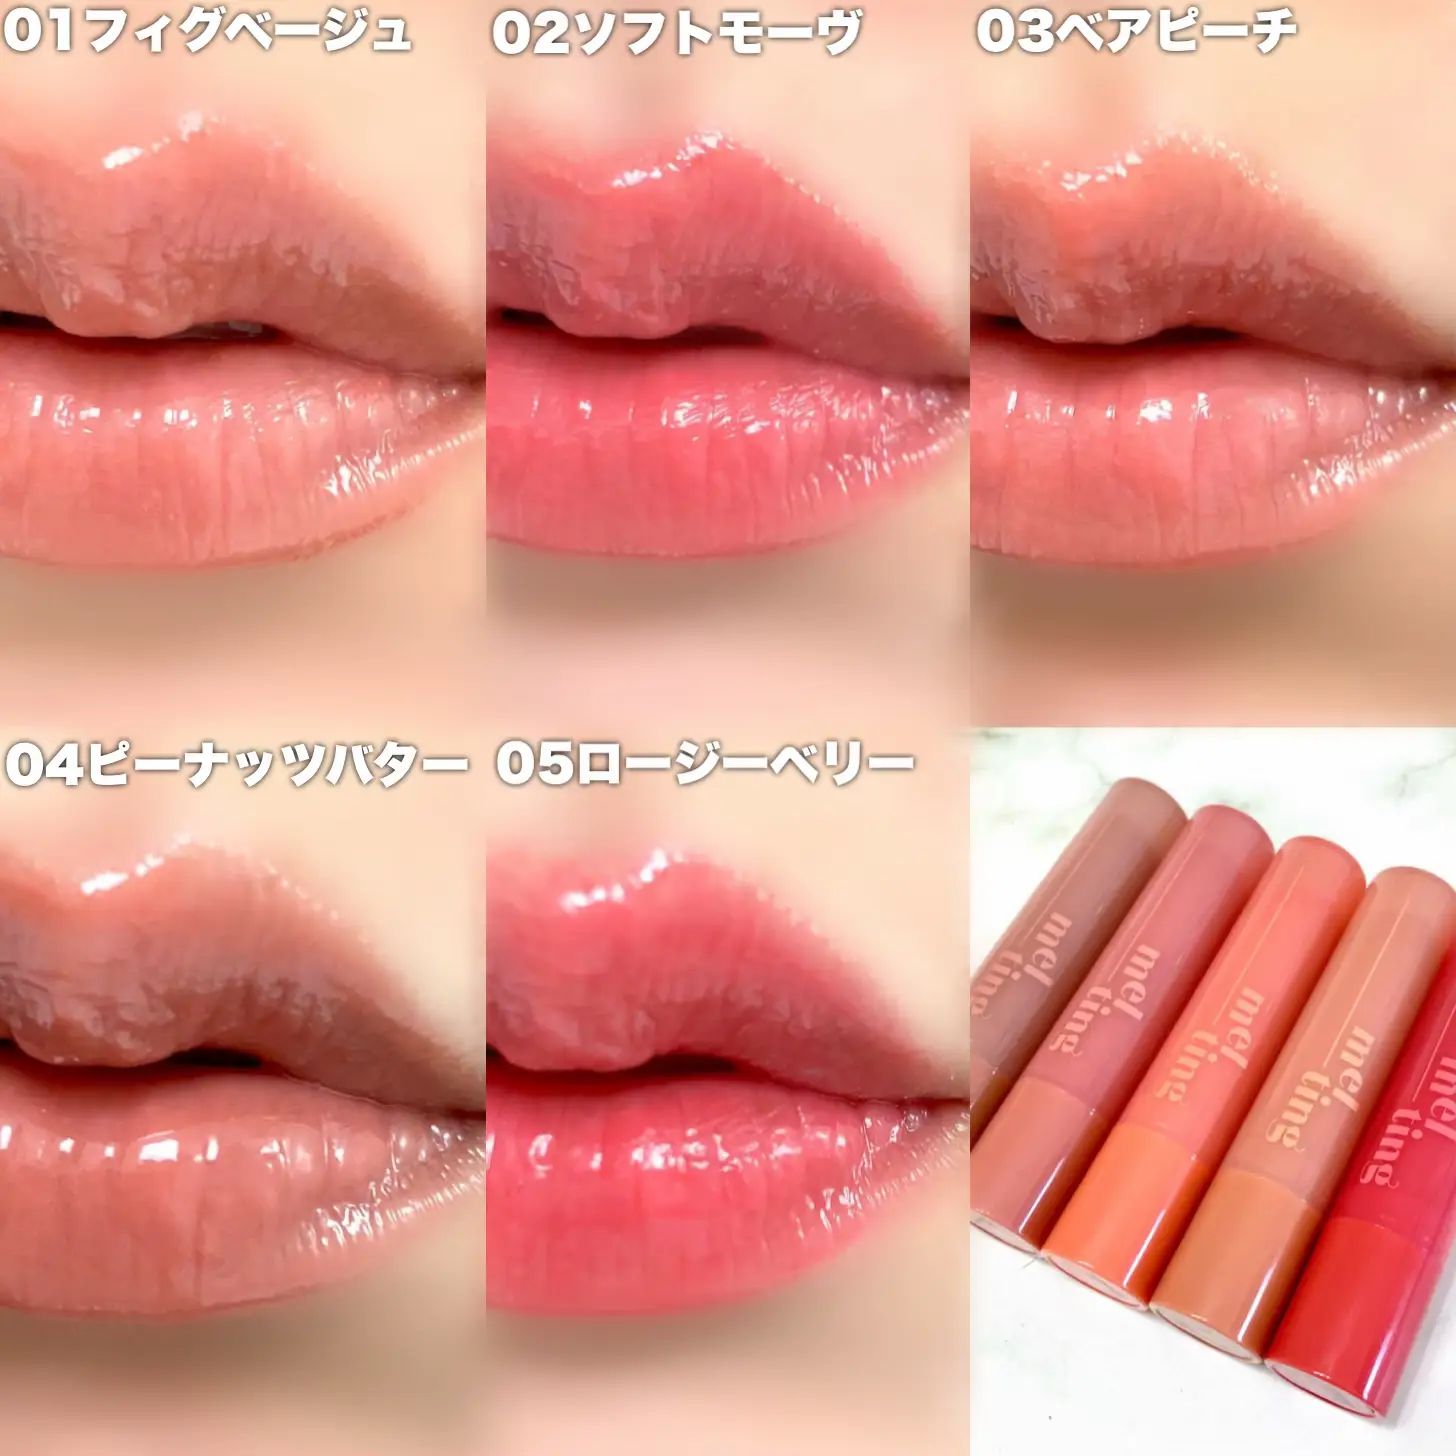 How to: The Perfect Shiny Nude Lip, Gallery posted by Nicole_jordy